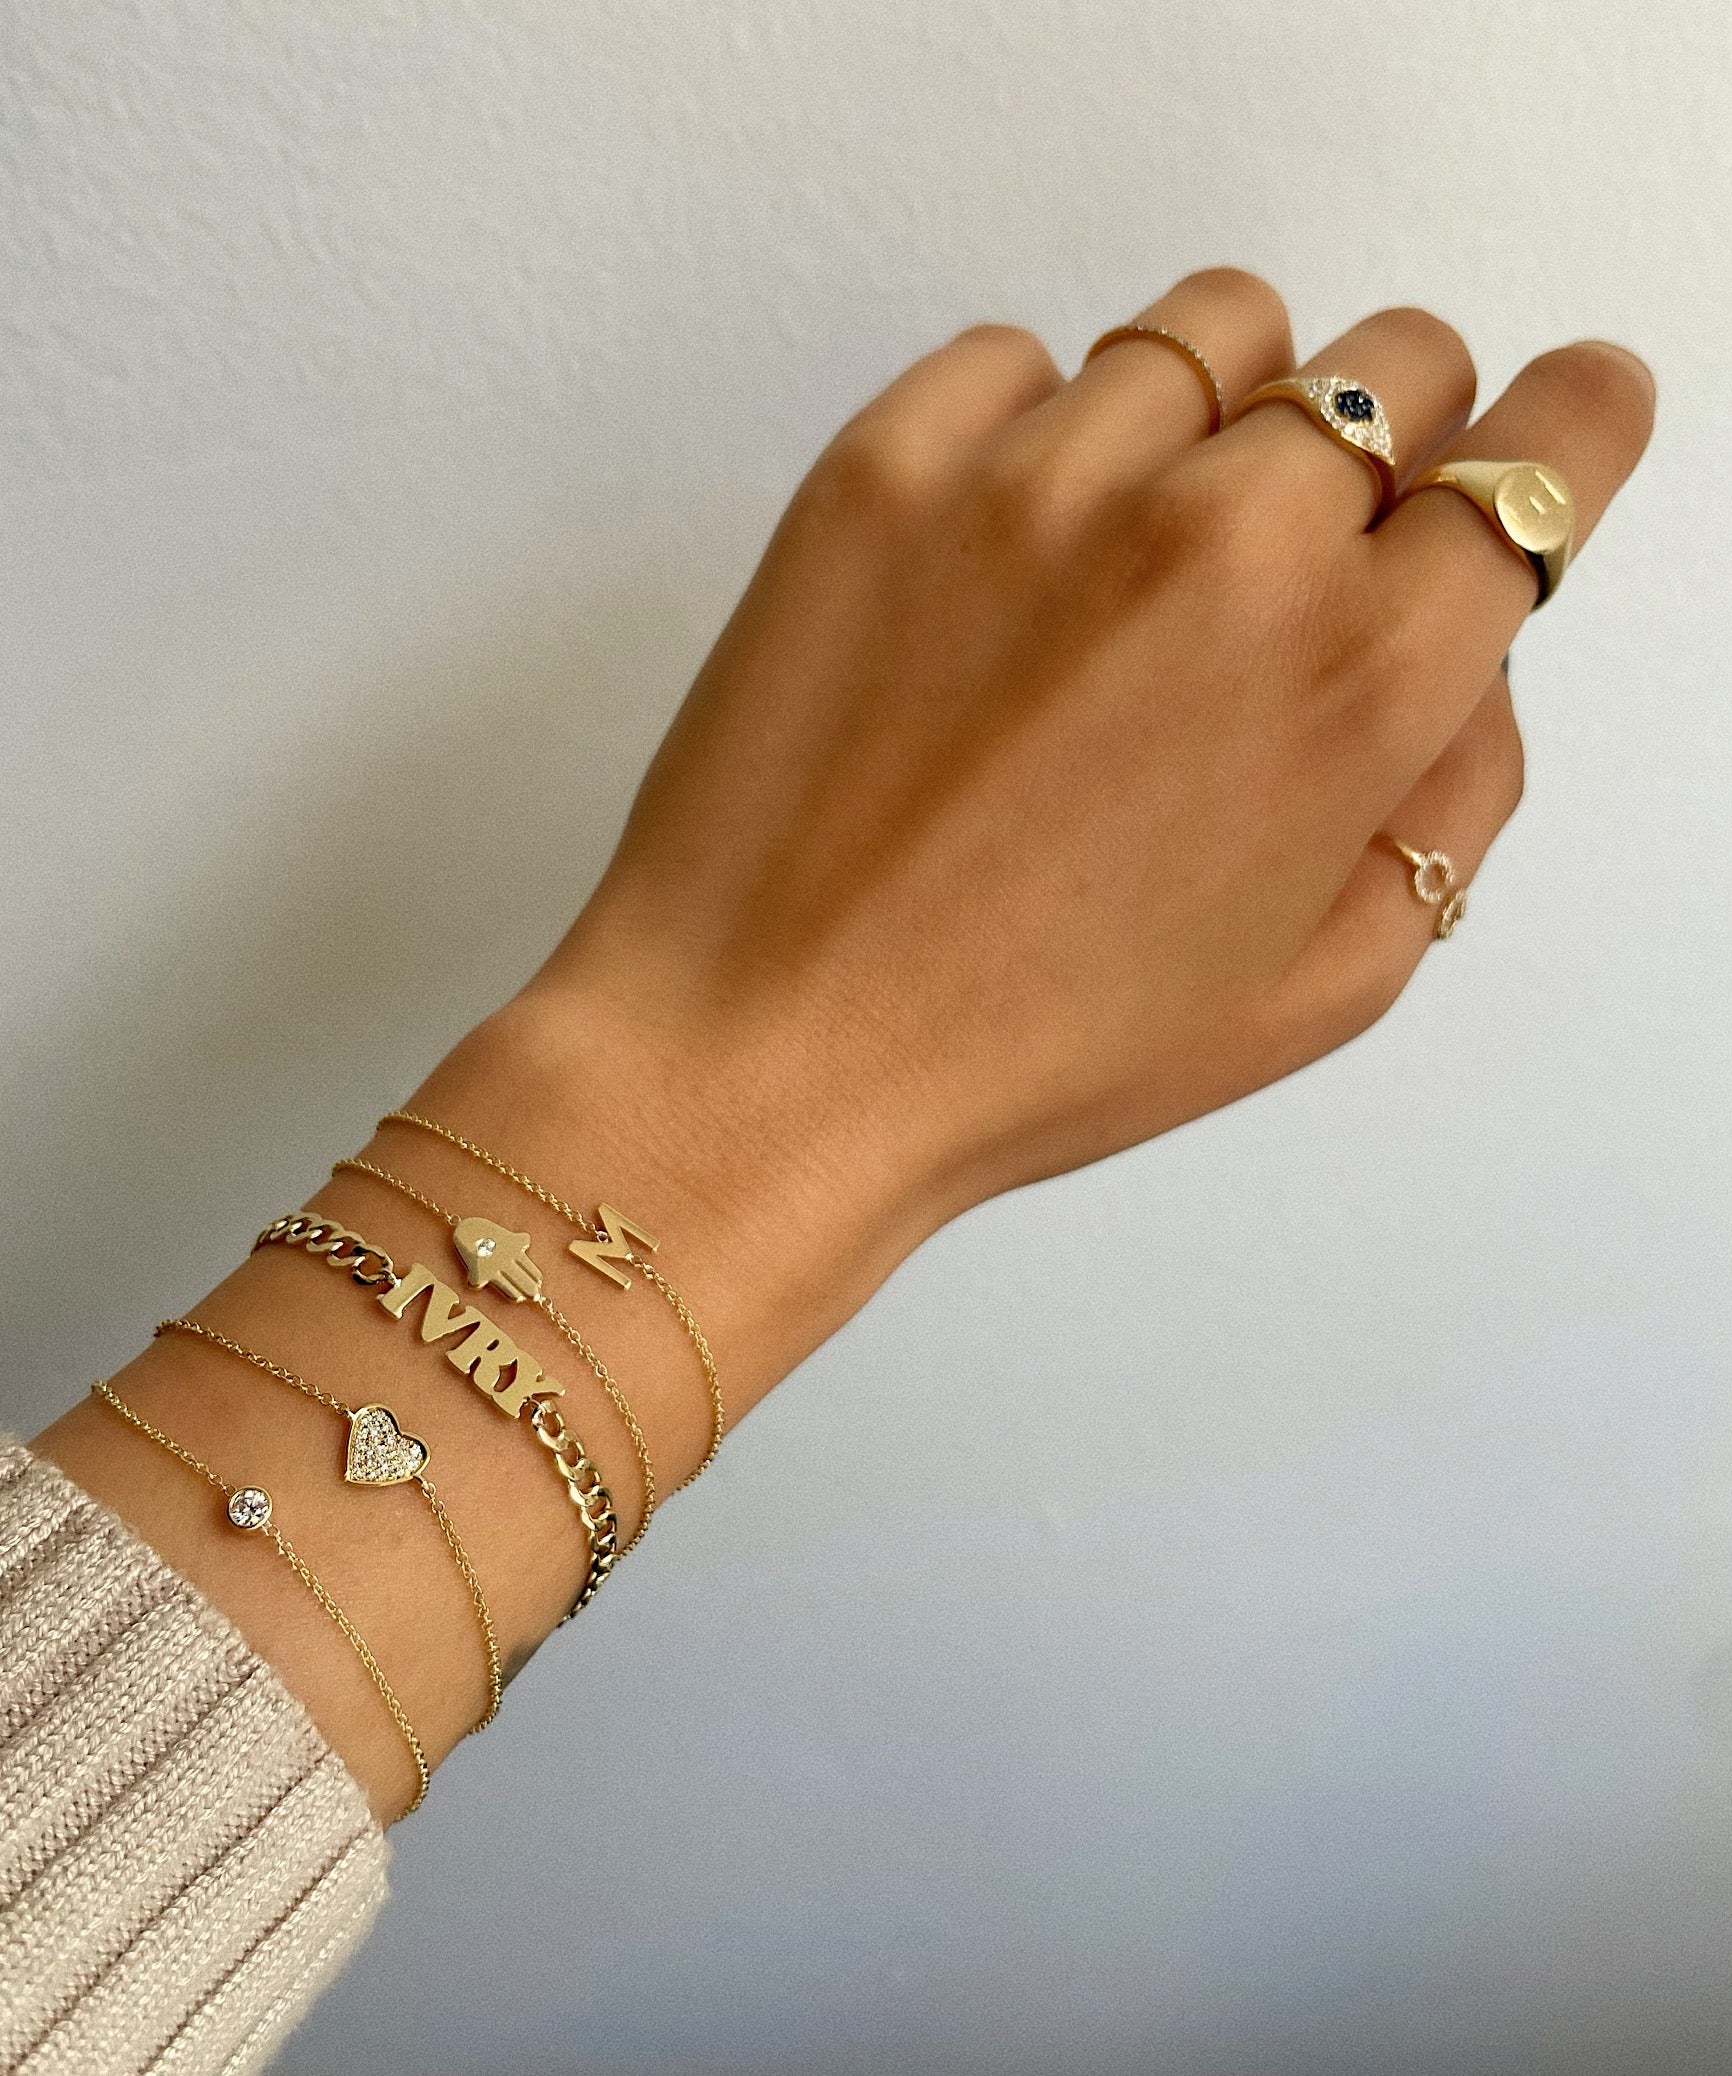 14K Solid Gold Bracelet, Hamsa Bracelet, Dainty Curb and Paperclip Chain,  Gift for Christmas, Minimalist Gift, Gift for Her, Christmas Gift - Etsy